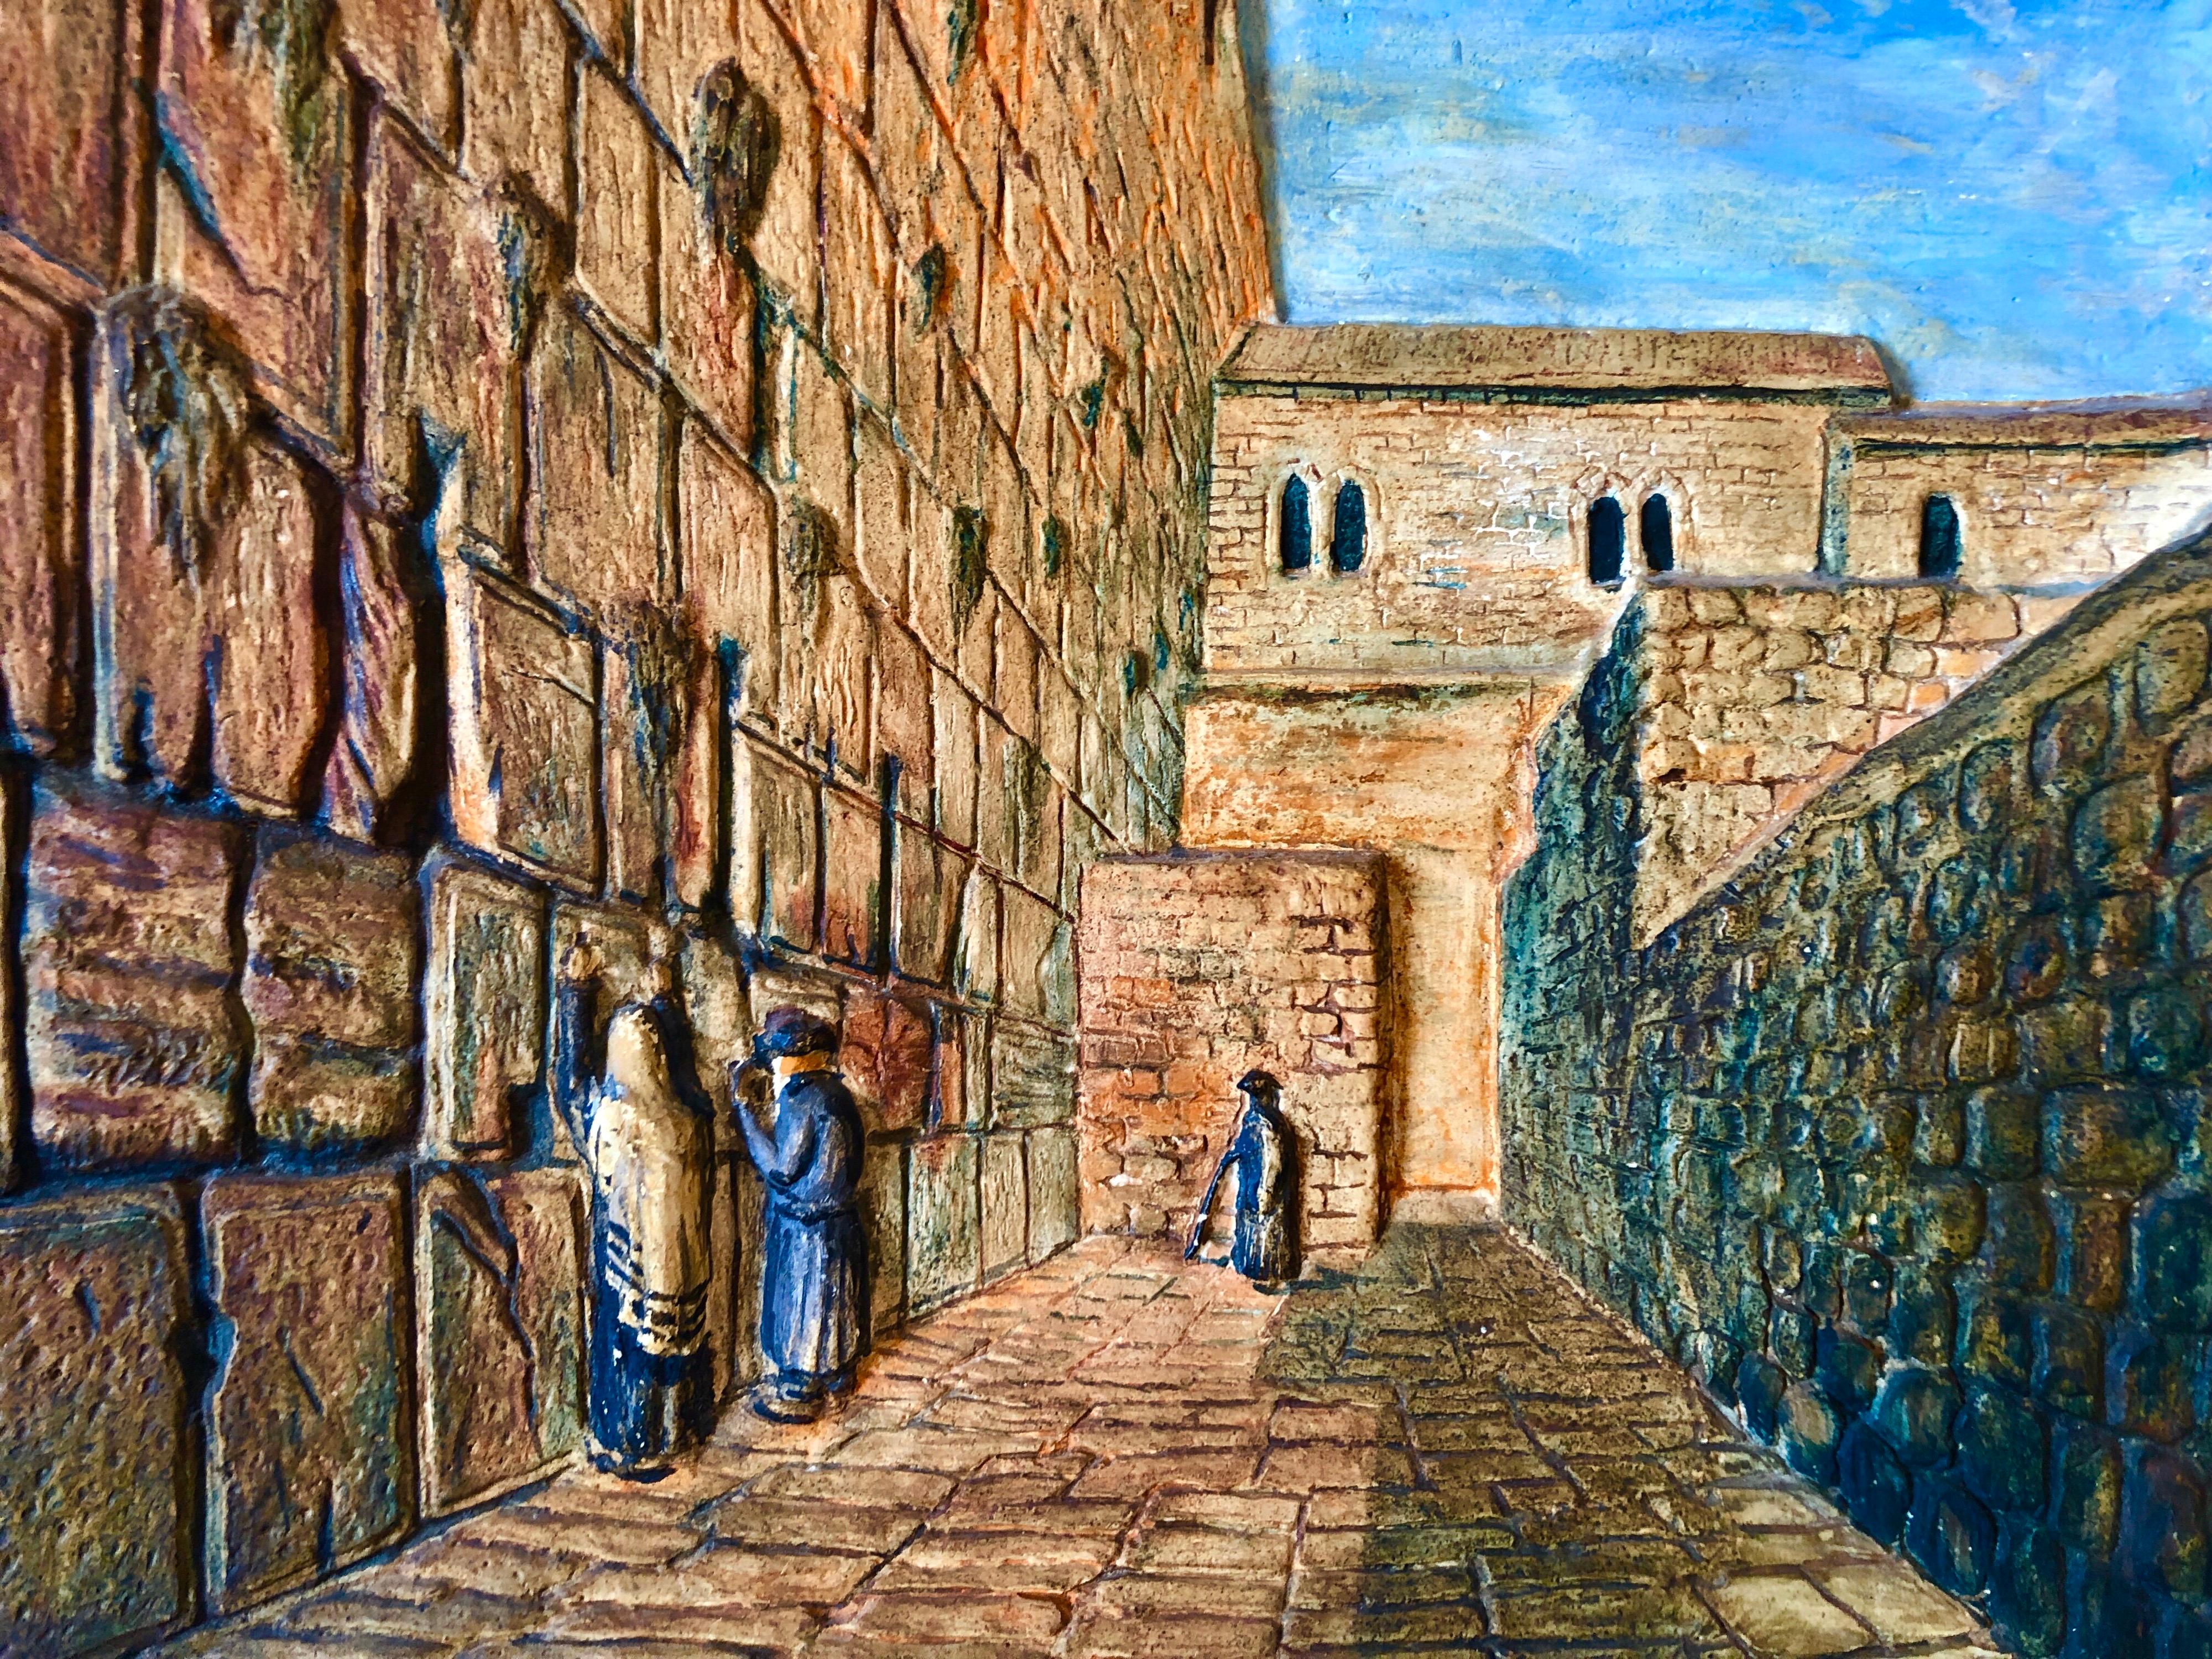 Joseph Manobla, (Israeli, 1930-1979), The Western Wall (The Wailing Wall), Painted diorama sculptural relief, 12.5 x 15.75 inches (relief), 17 x 20.25 inches (including original painted artist’s frame), Signed lower right. titled verso 